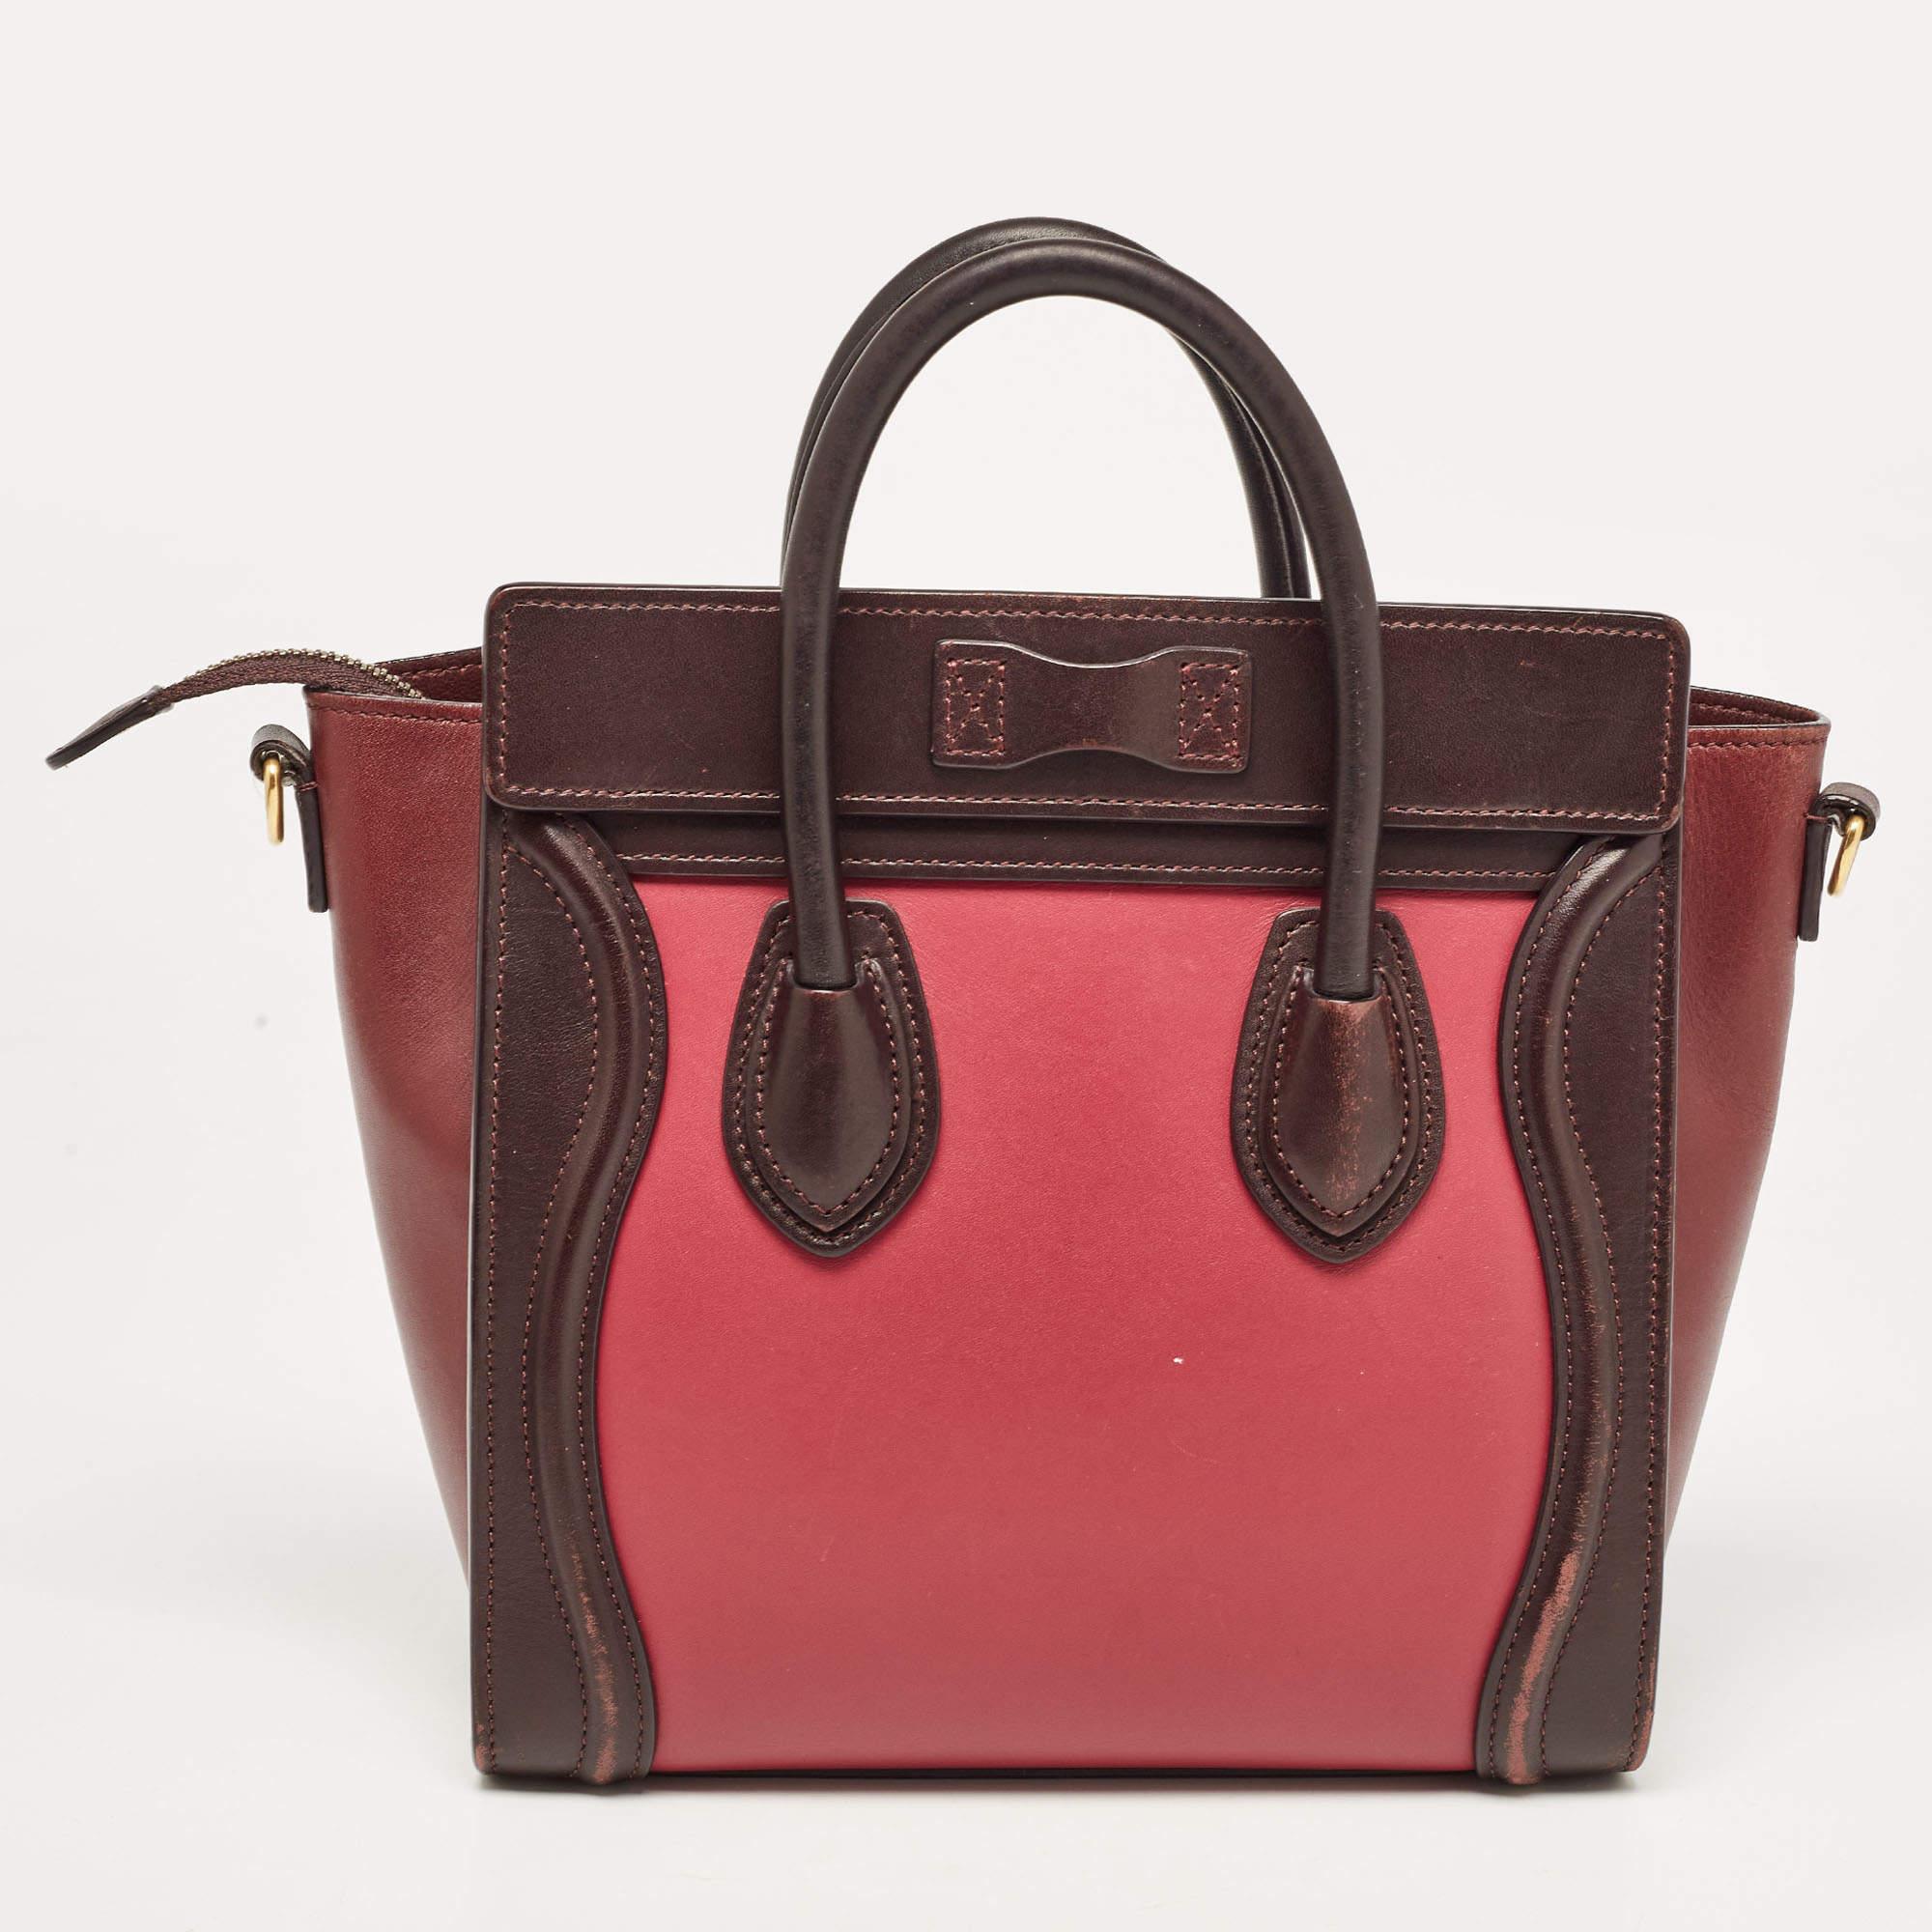 The Nano Luggage tote from Celine is one of the most popular handbags in the world. This tote is crafted from leather and designed in tricolors. It comes with rolled top handles, a detachable shoulder strap, and a front zip pocket. The bag is